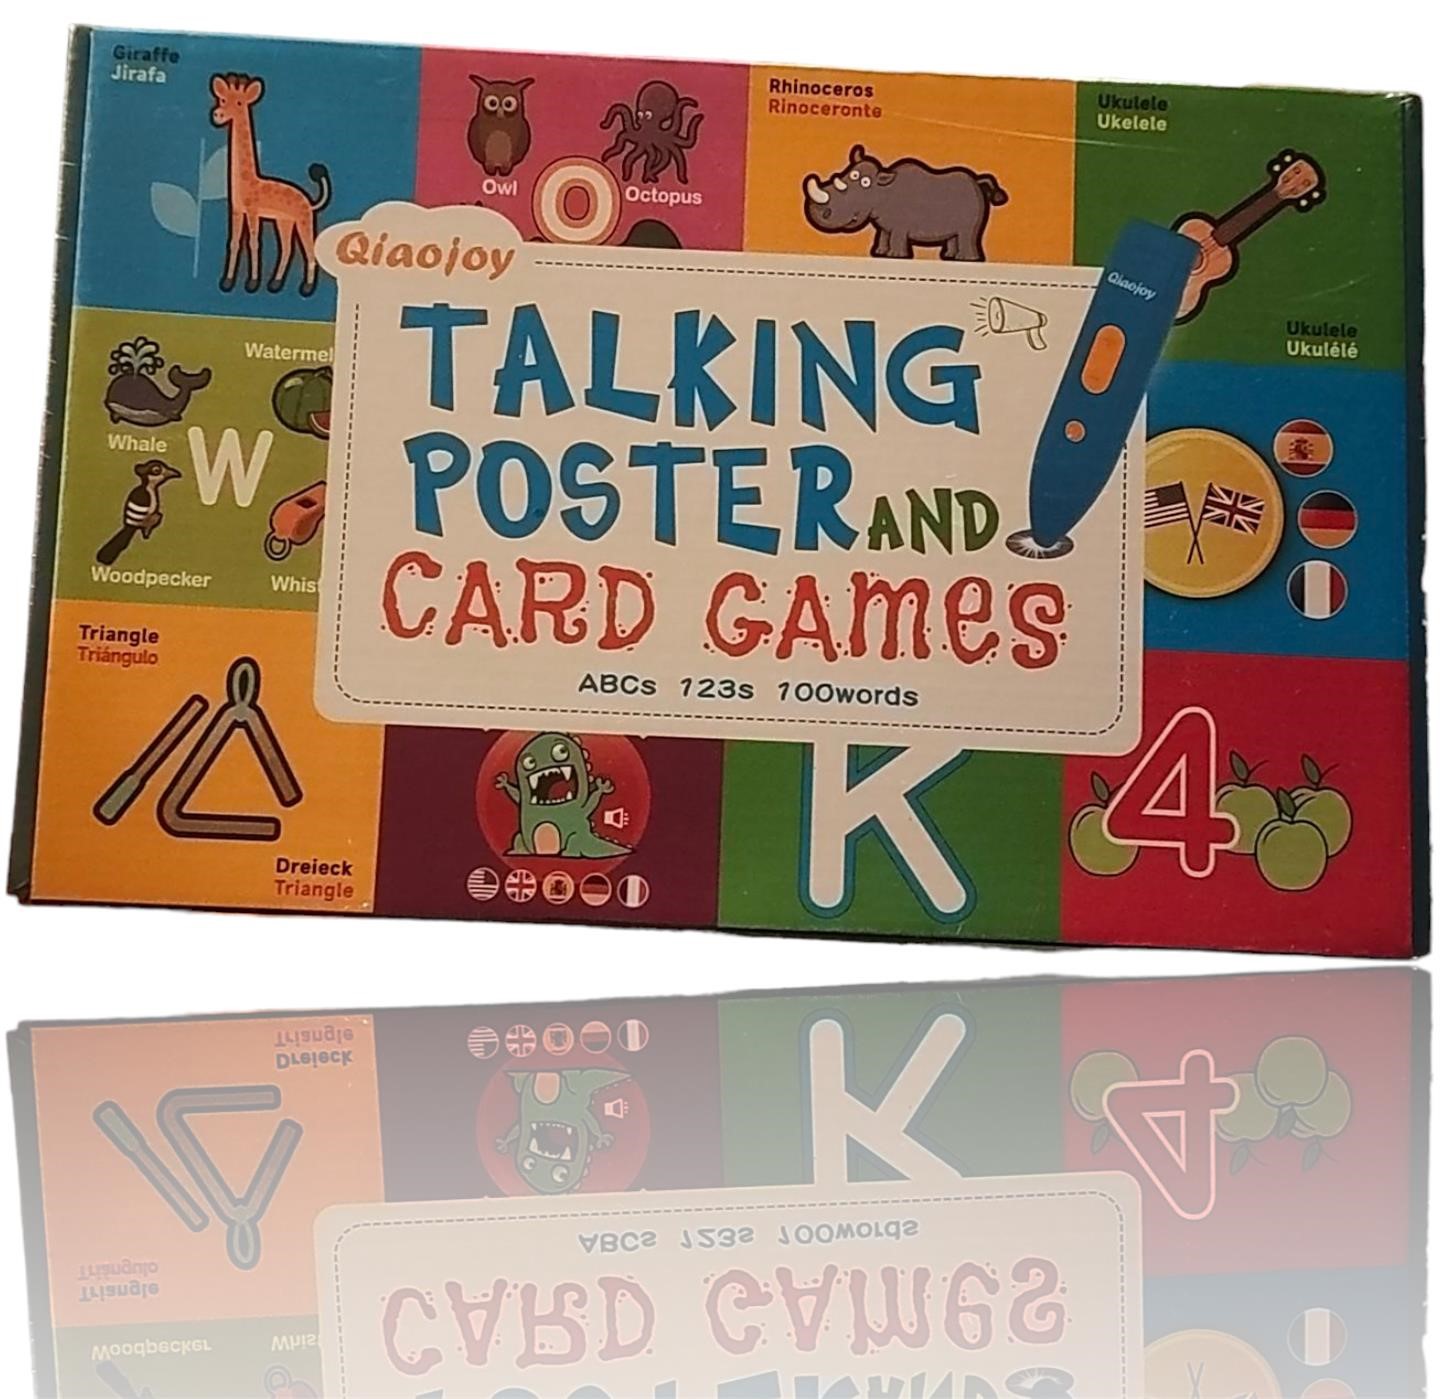 Talking poster and card games